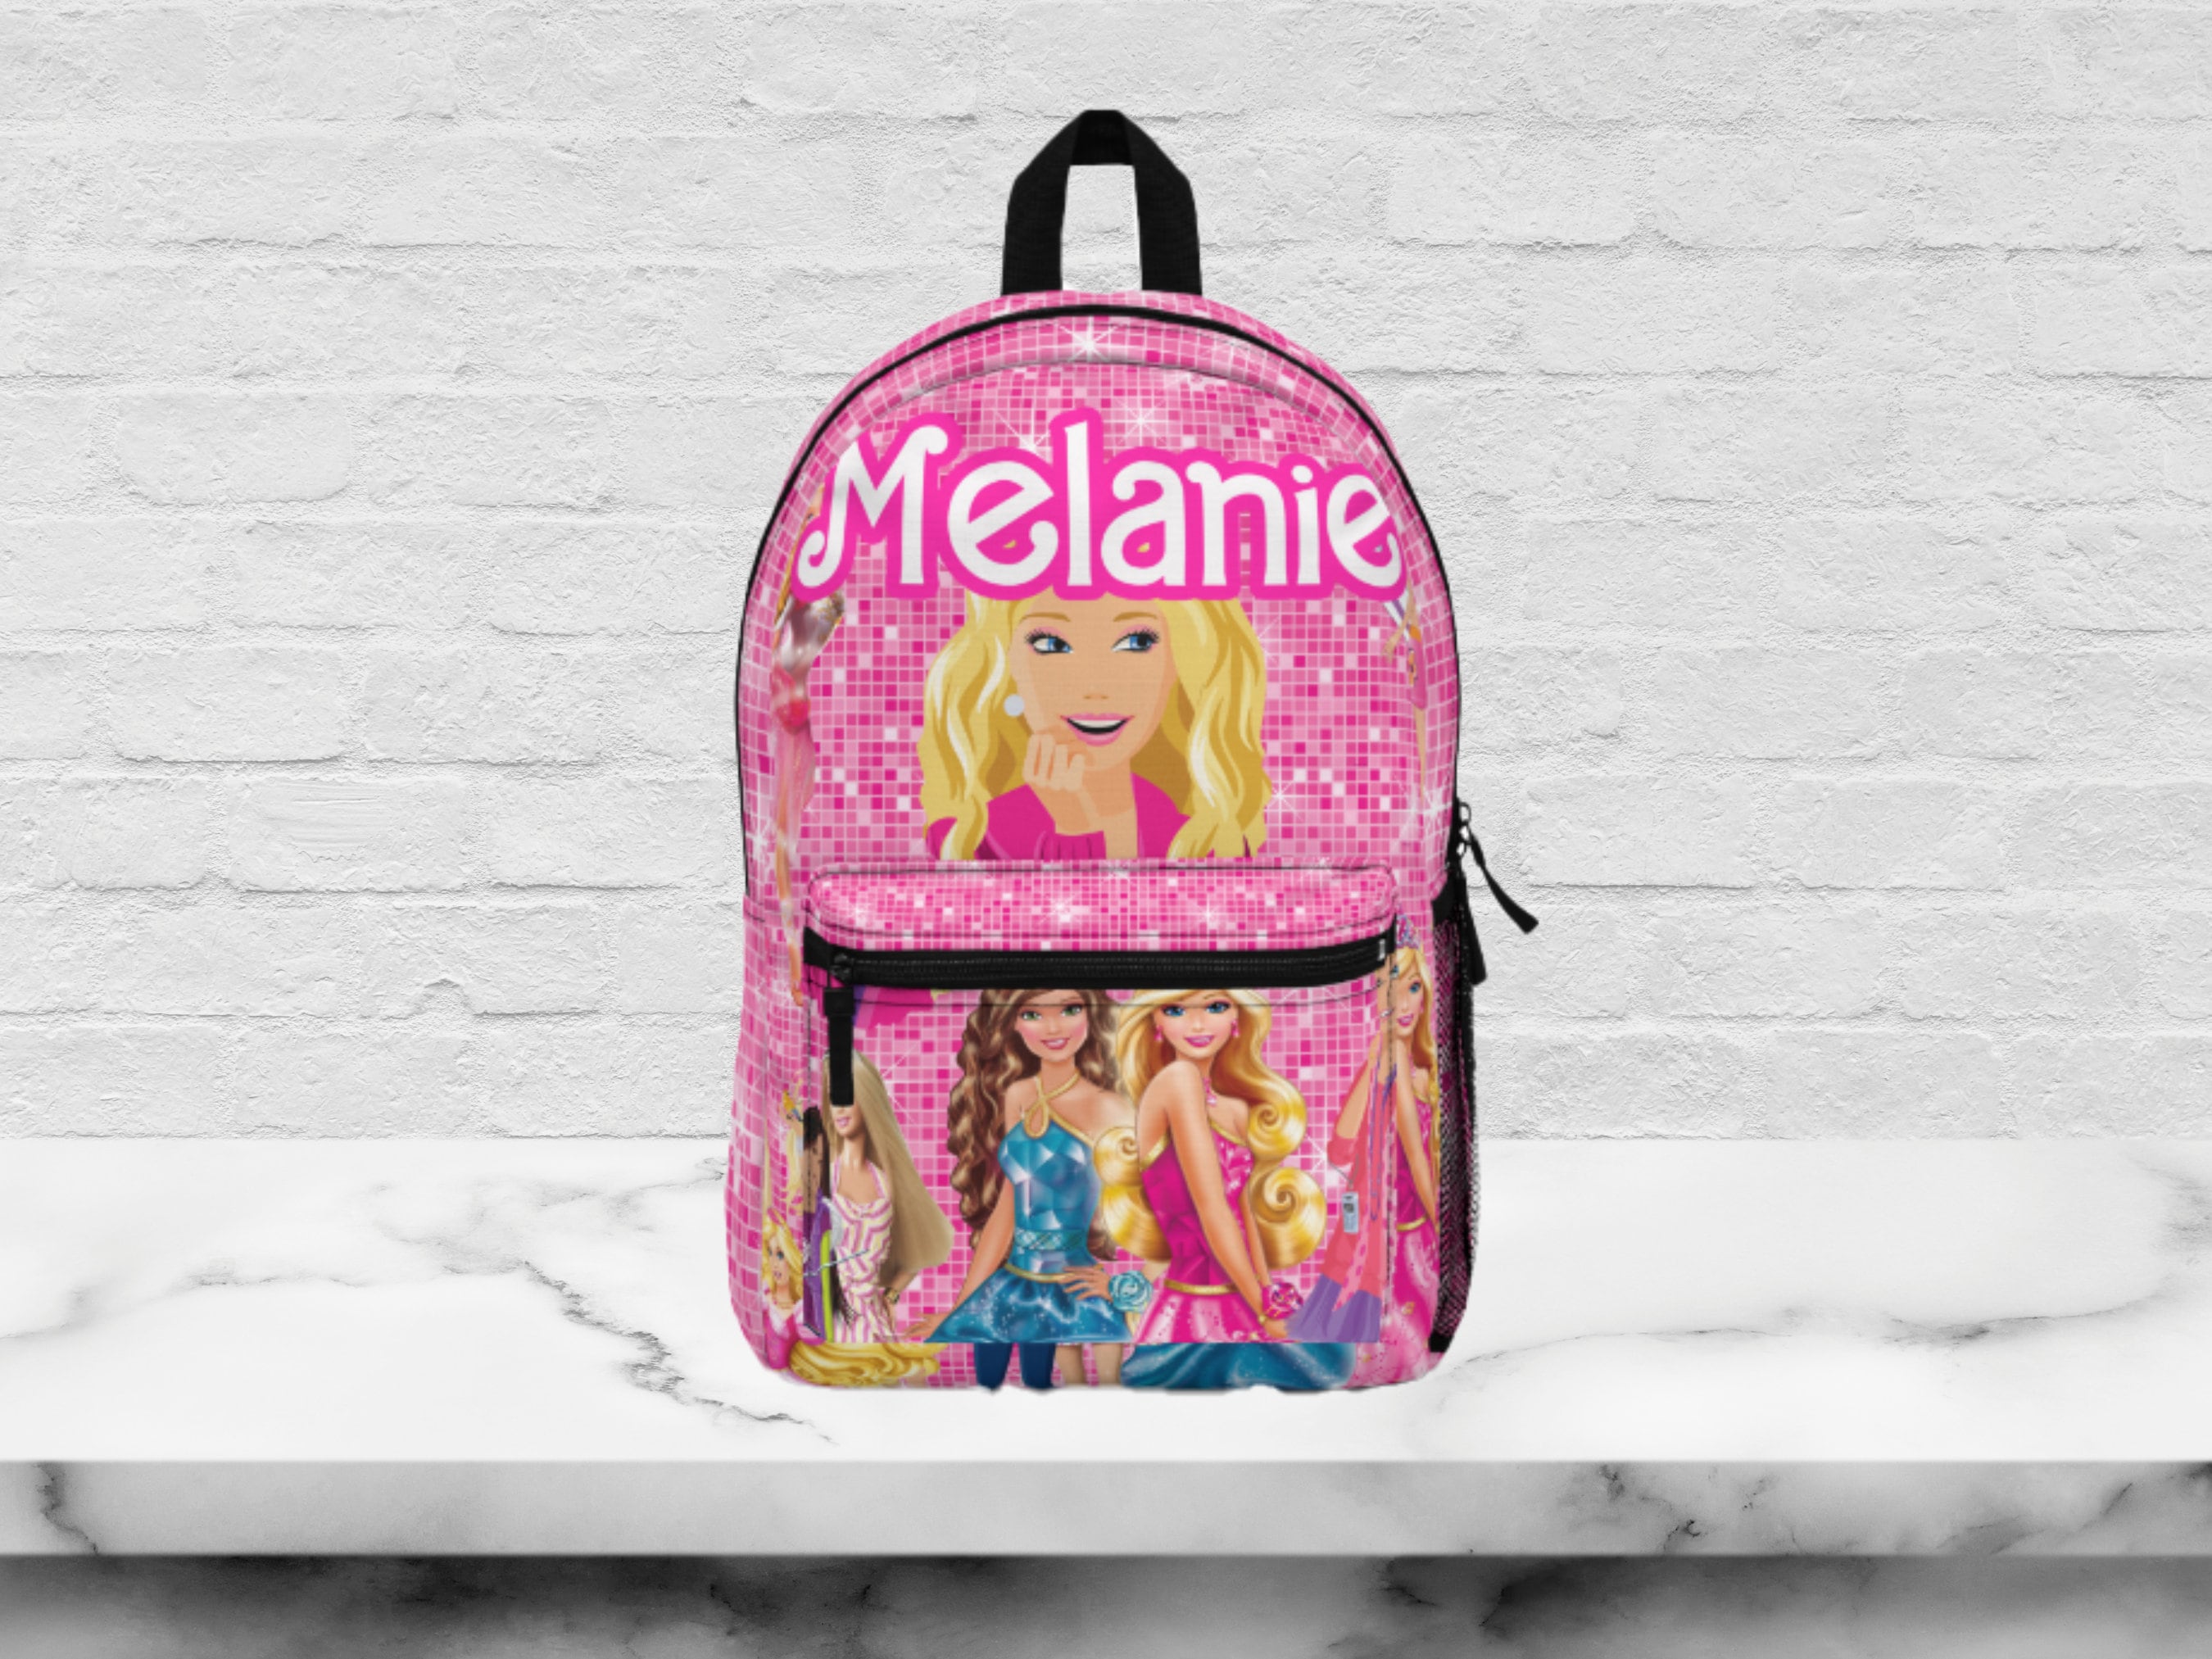 Barbie School Bag - Get Best Price from Manufacturers & Suppliers in India